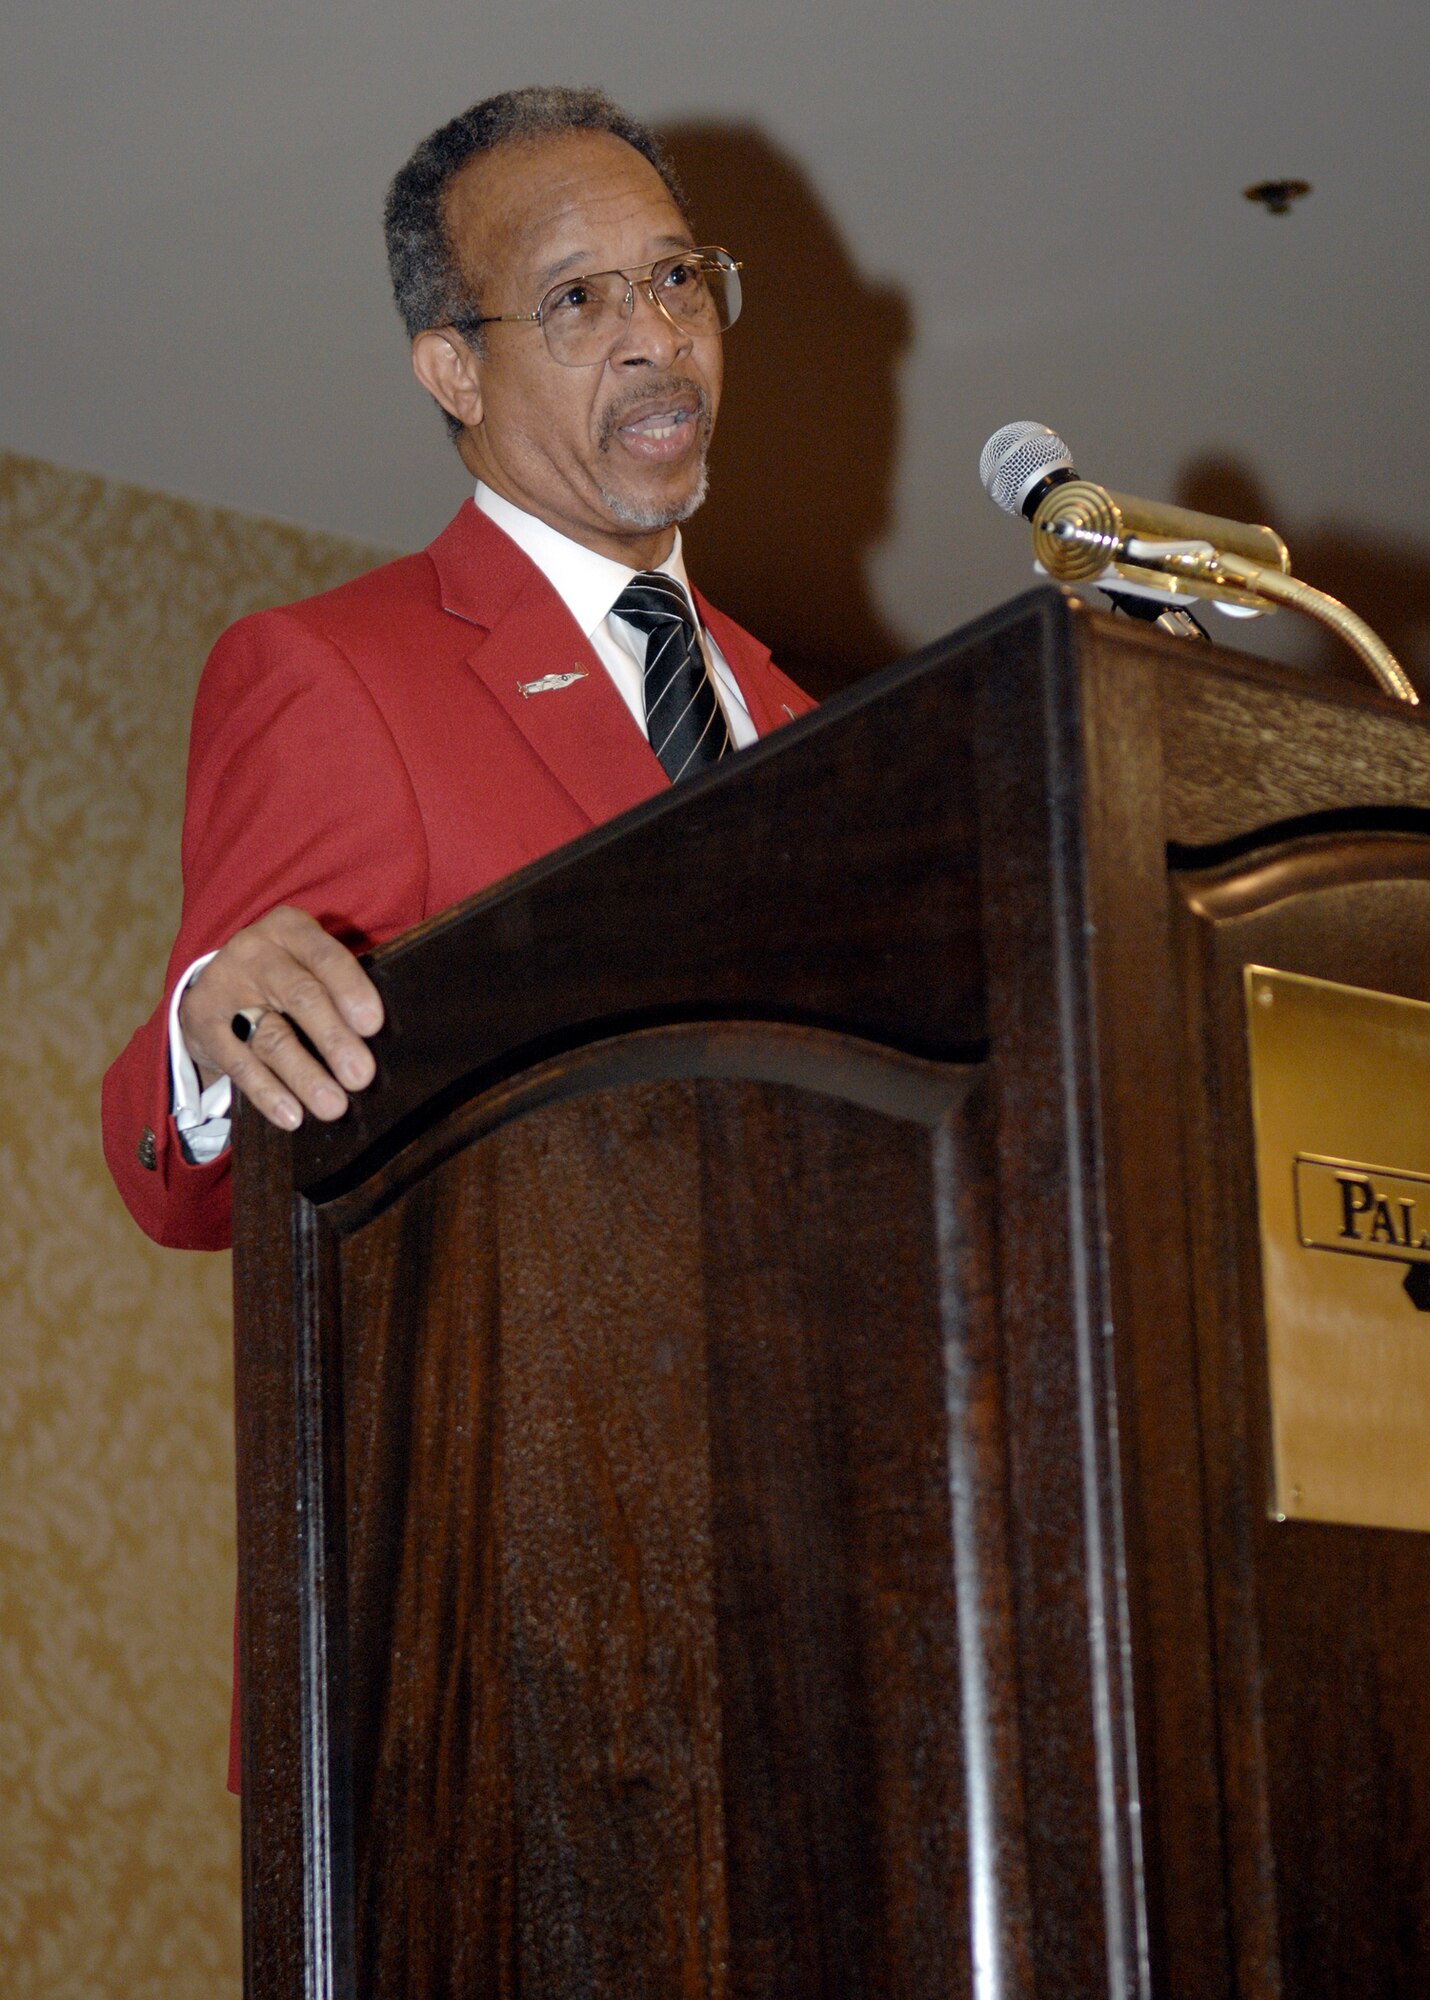 Retired Lt. Gen. Russell C. Davis addresses military members and civilians during the Lonely Eagles Ceremony at the 38th Annual Tuskegee Airman, Inc., convention Aug. 7 in Las Vegas. General Davis, the Tuskegee Airman, Inc., national president, discussed the legacy of all Tuskegee Airmen and memorialized the black aviators who died since the 2008 convention. TAI is a nonprofit organization dedicated to honoring the accomplishments of the African-American air, ground and operations crewmembers in the Army Air Corps during World War II. (U.S. Air Force photo/Senior Airman Joseph Araiza) 
